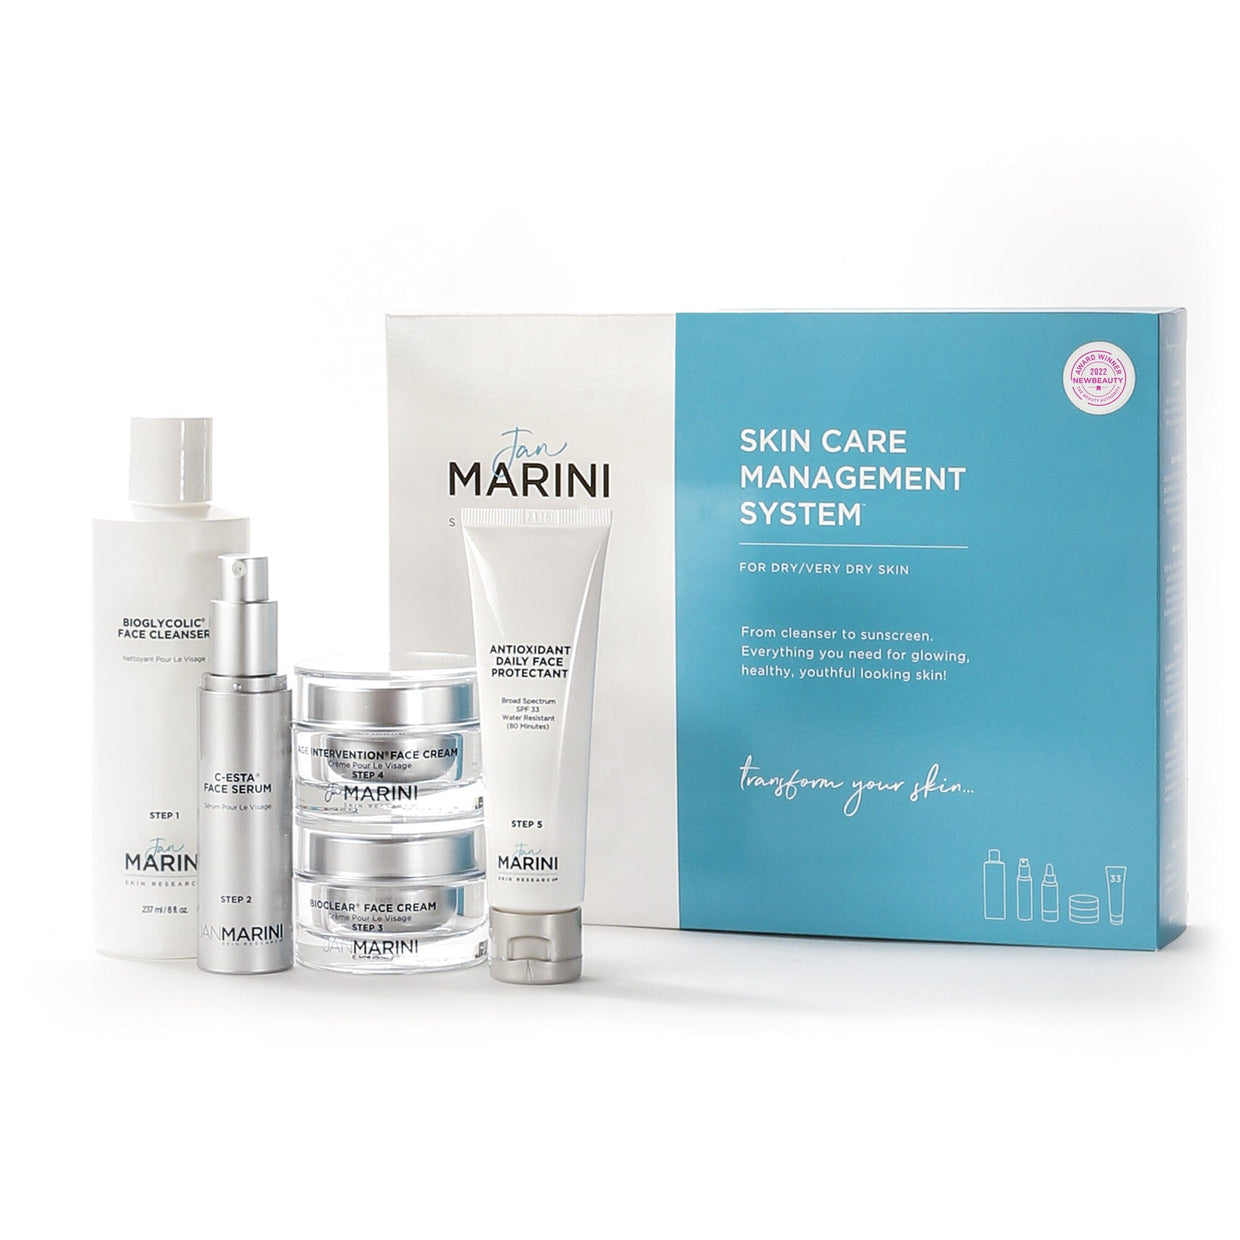 Jan Marini Skin Care Management System - Dry/Very Dry Skin with Antioxidant Daily Face Protectant SPF 33 Anti-Aging Skin Care Kits Jan Marini Shop at Exclusive Beauty Club